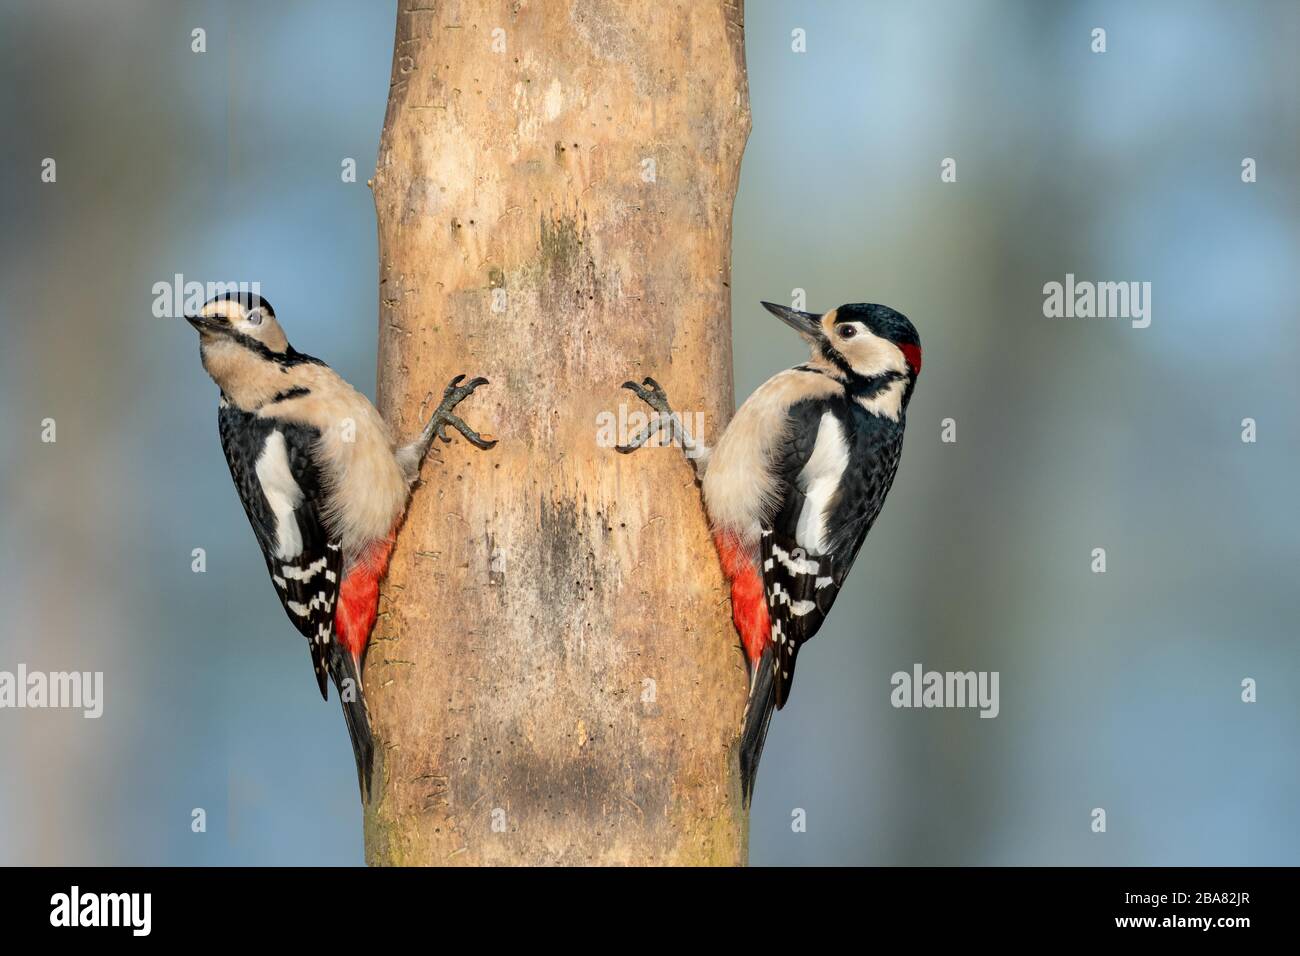 Pair of brightly colored european great spotted woodpeckers clinging to a tree trunk in winter Stock Photo